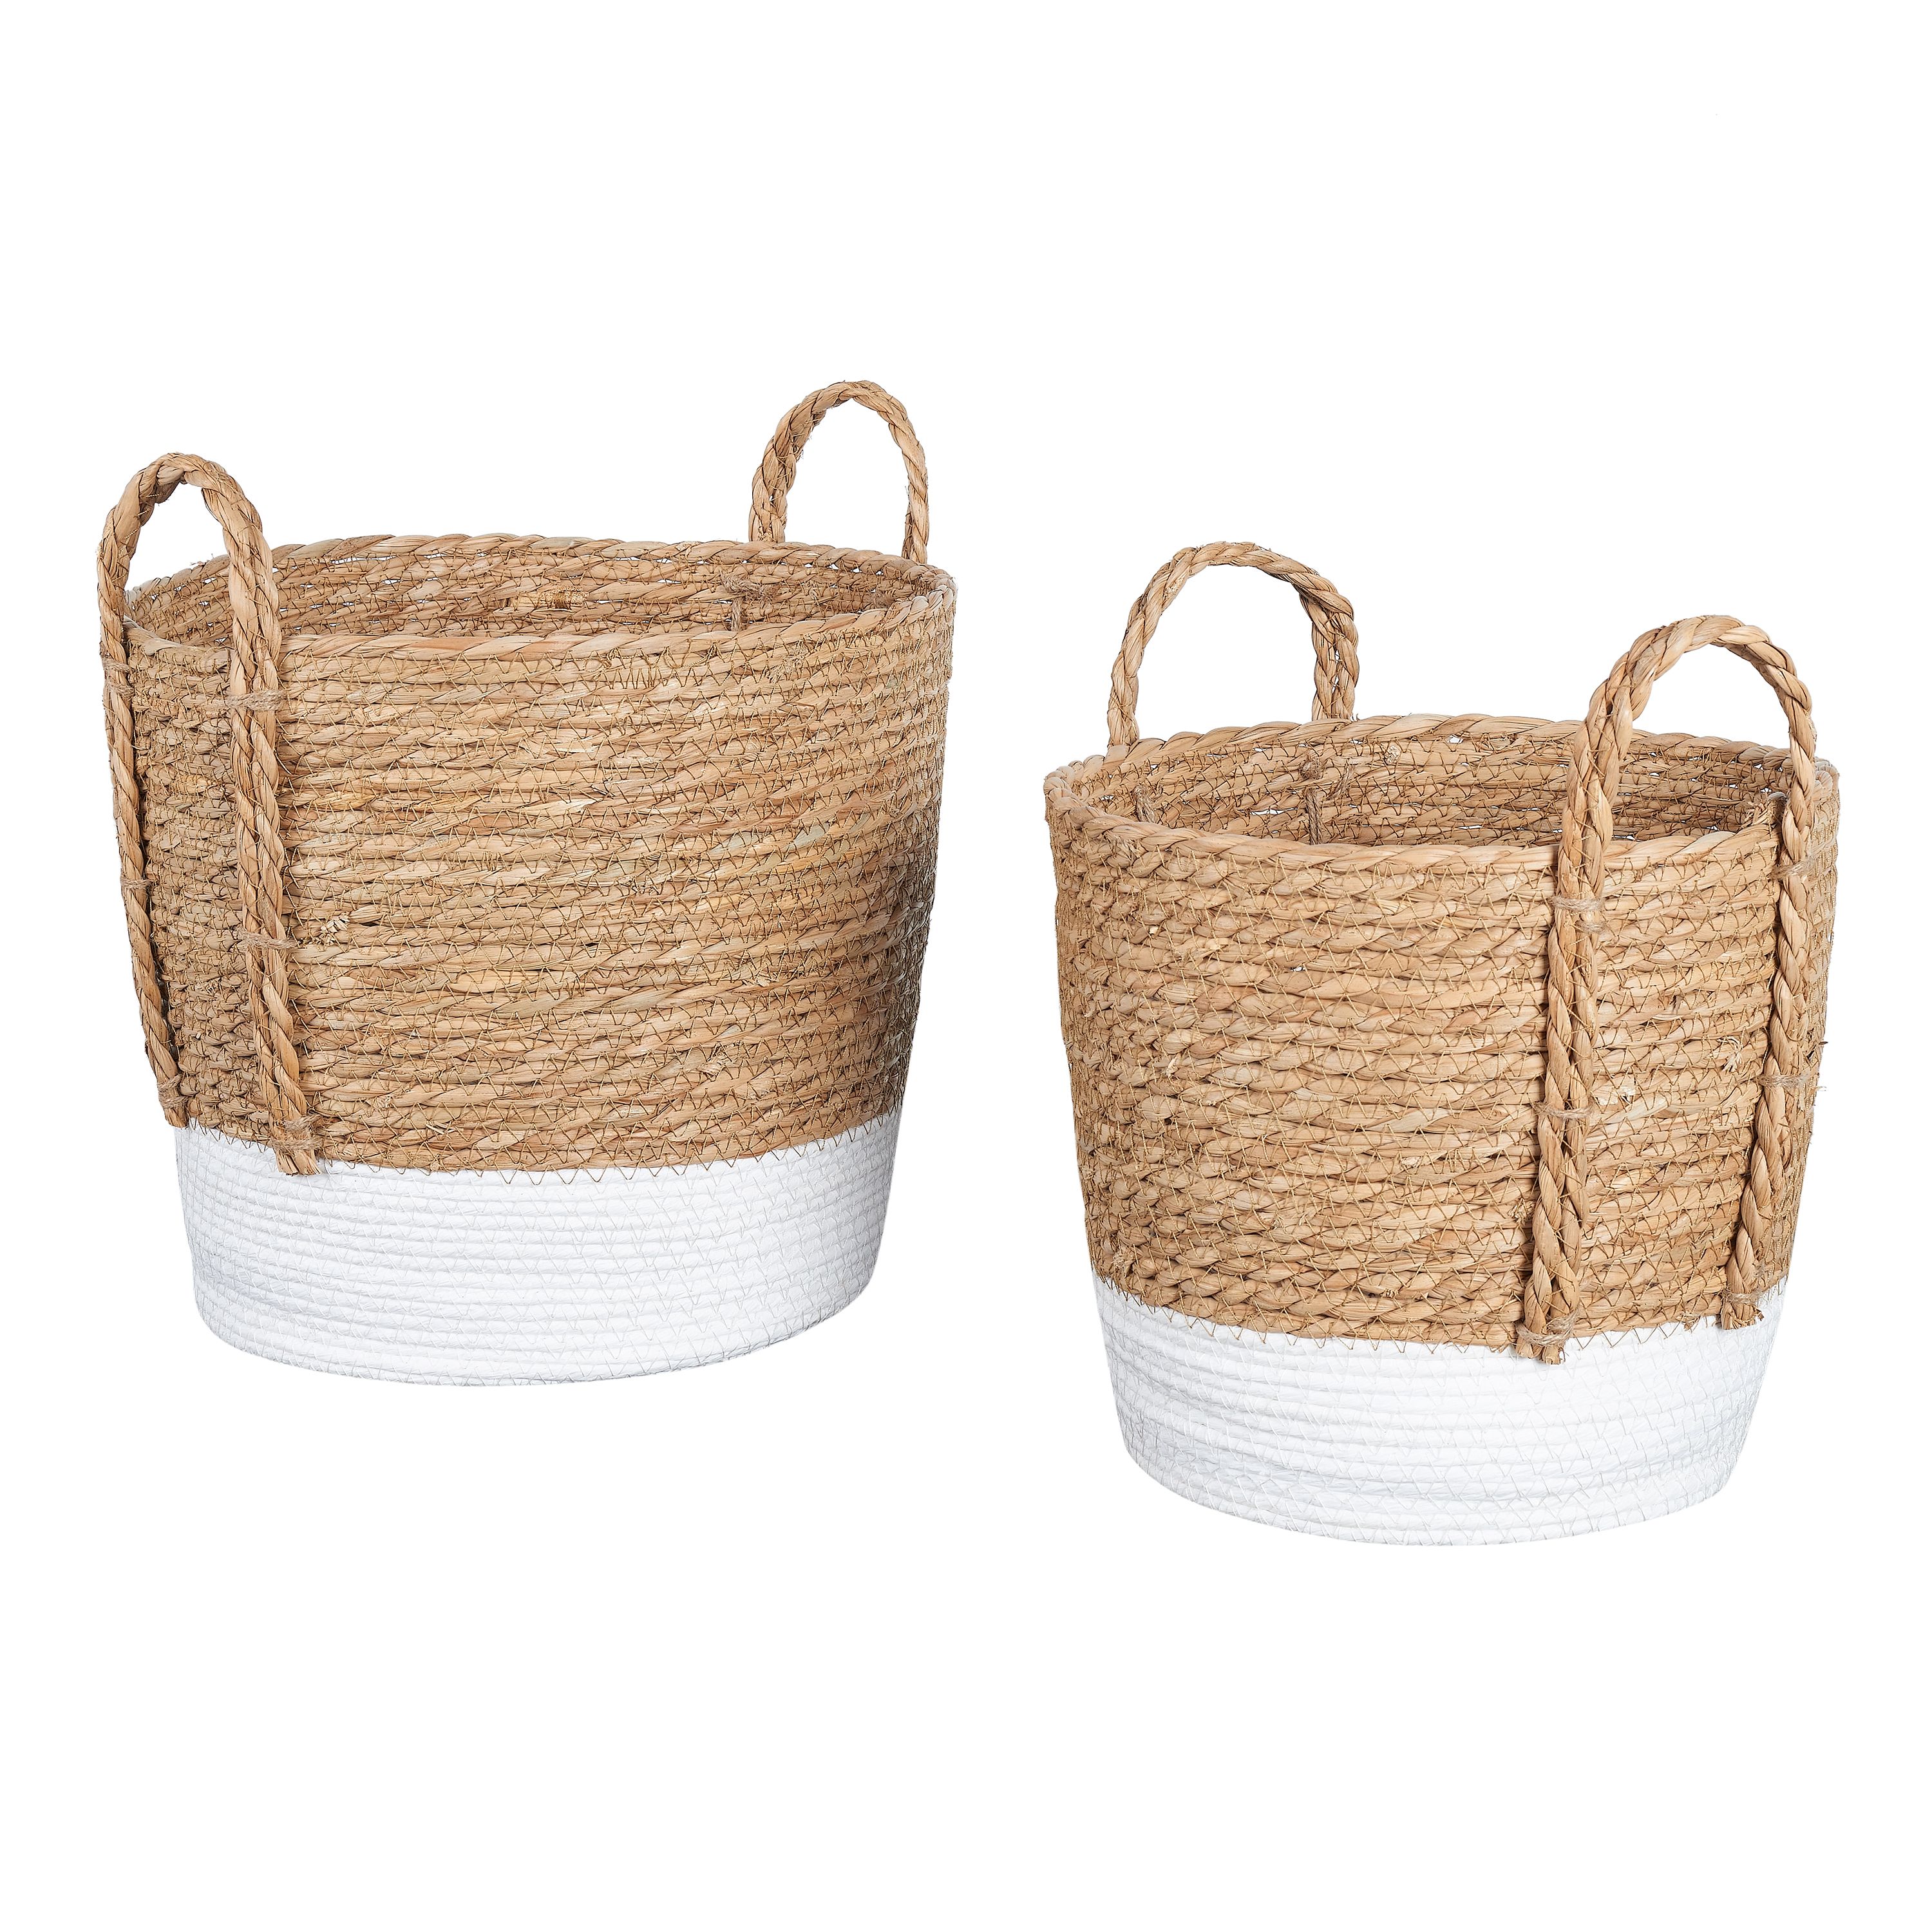 Mainstays Seagrass & Paper Rope Baskets, Set of 2, Small and Medium, Storage - image 1 of 6